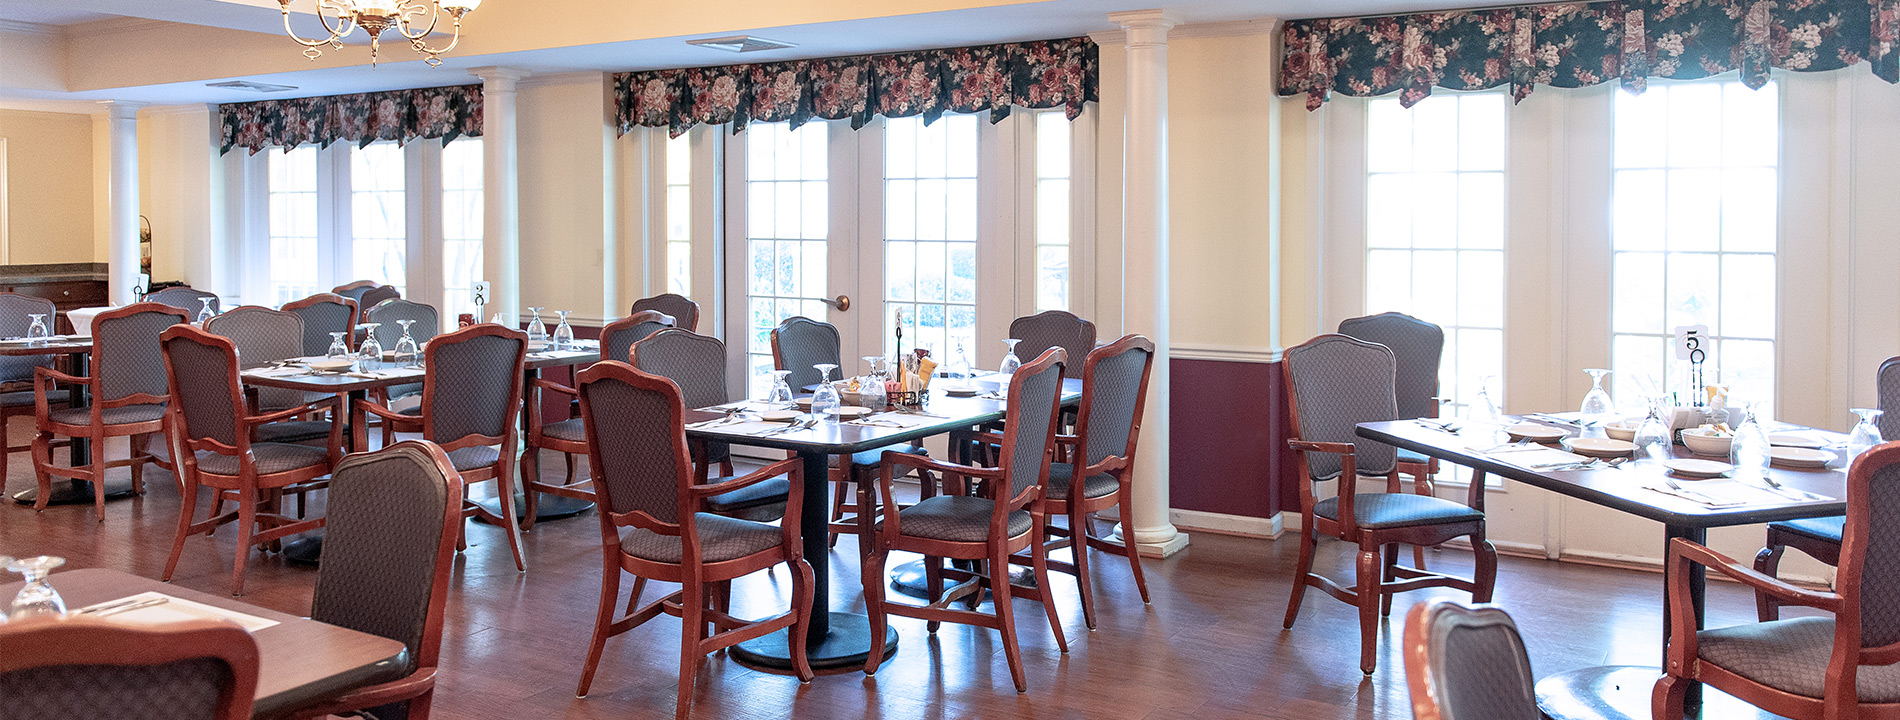 A dining area at The Legacy at Grand 'Vie.